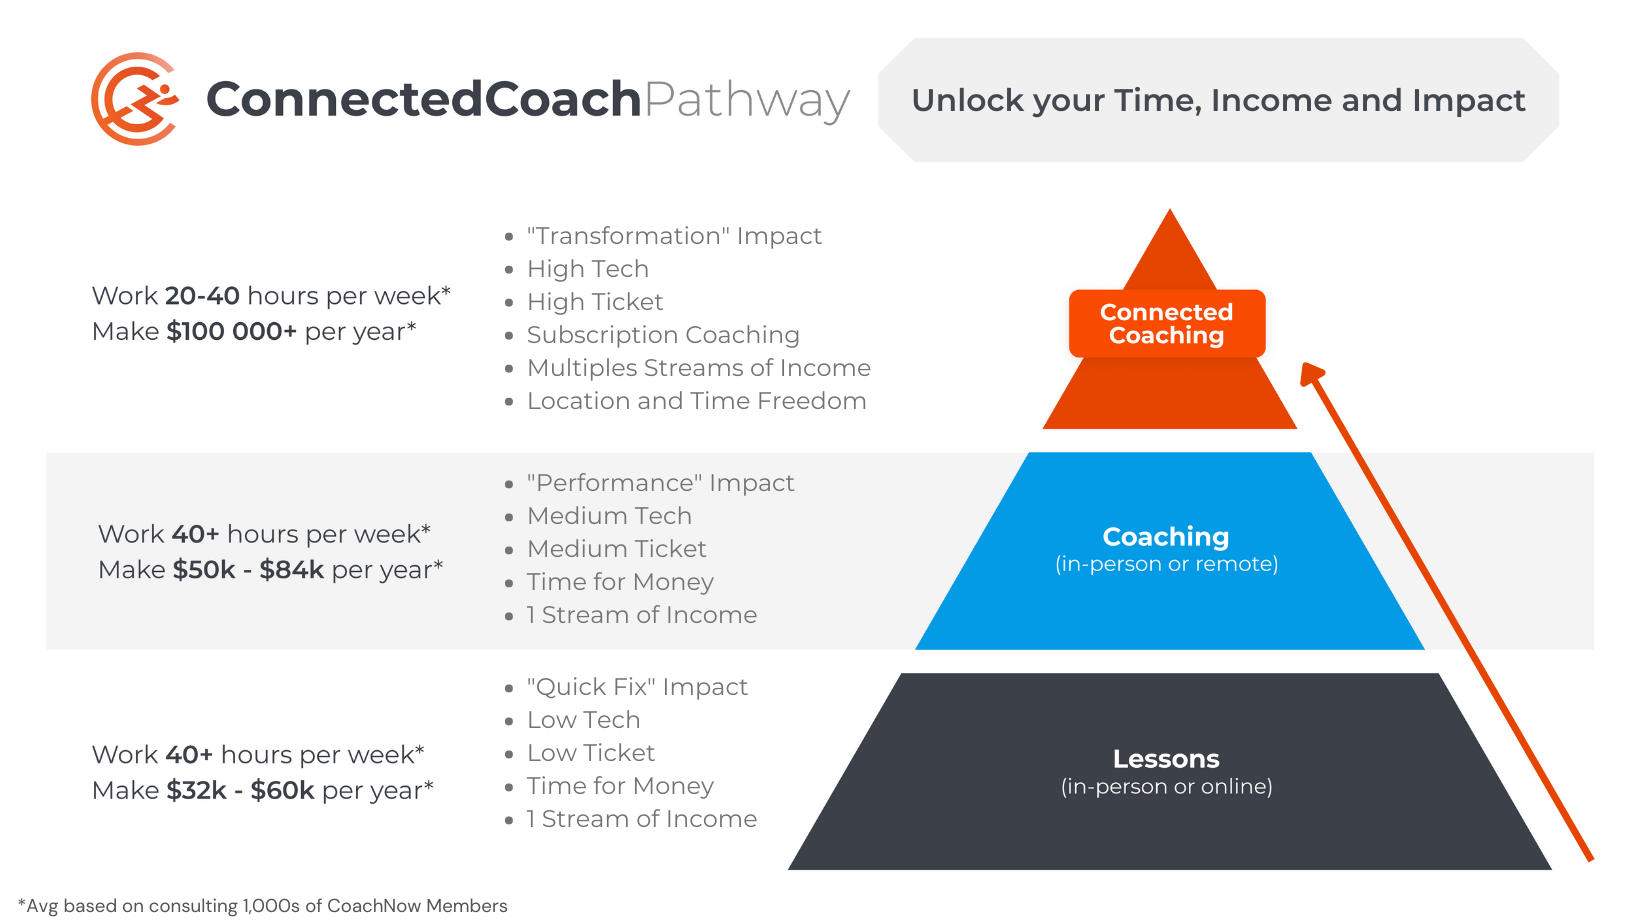 The ConnectedCoach Pathway